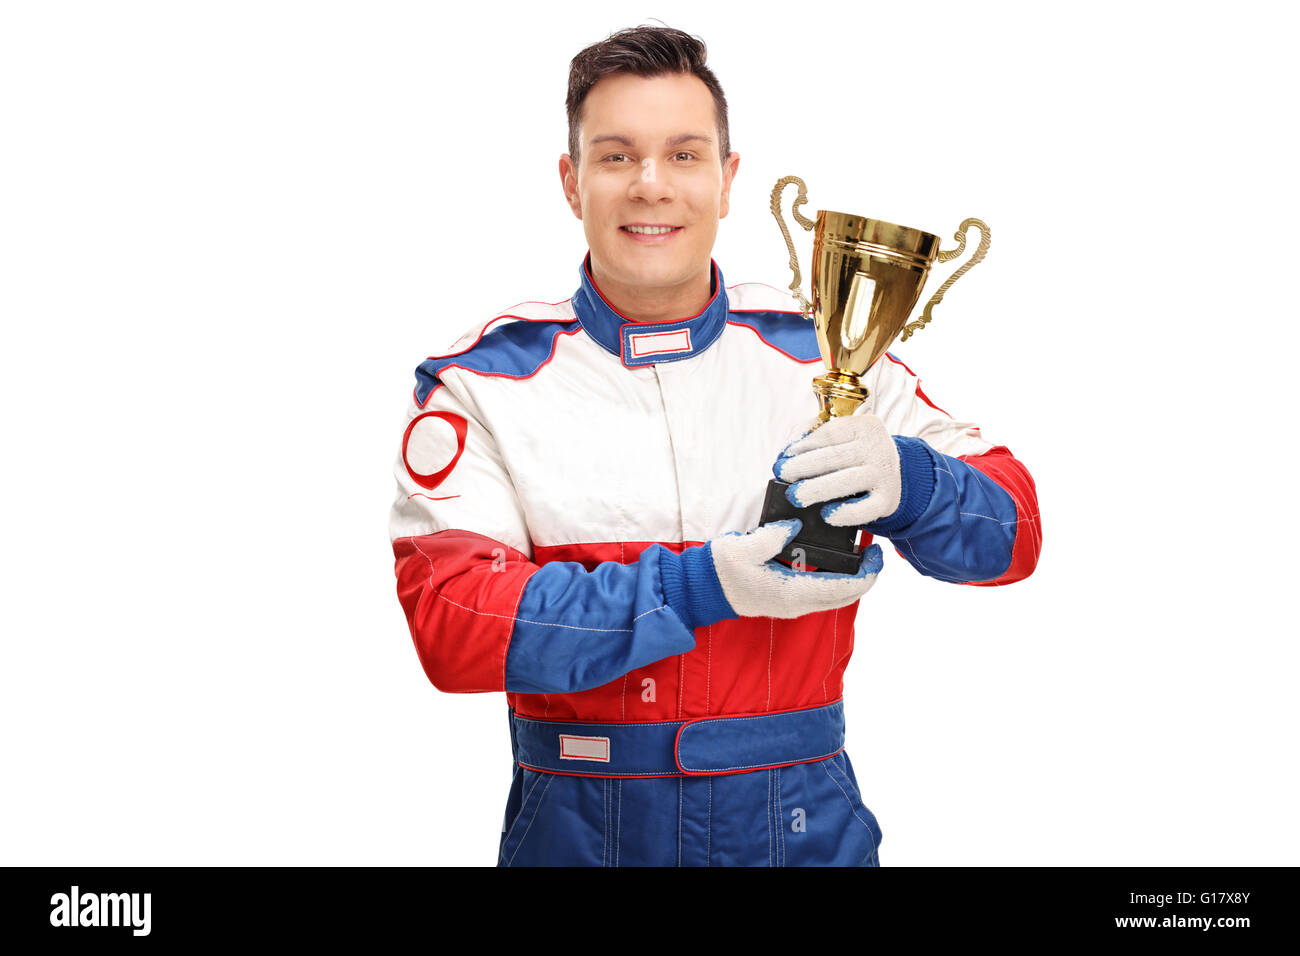 Young car racing champion holding a gold trophy and looking at the camera isolated on white background Stock Photo